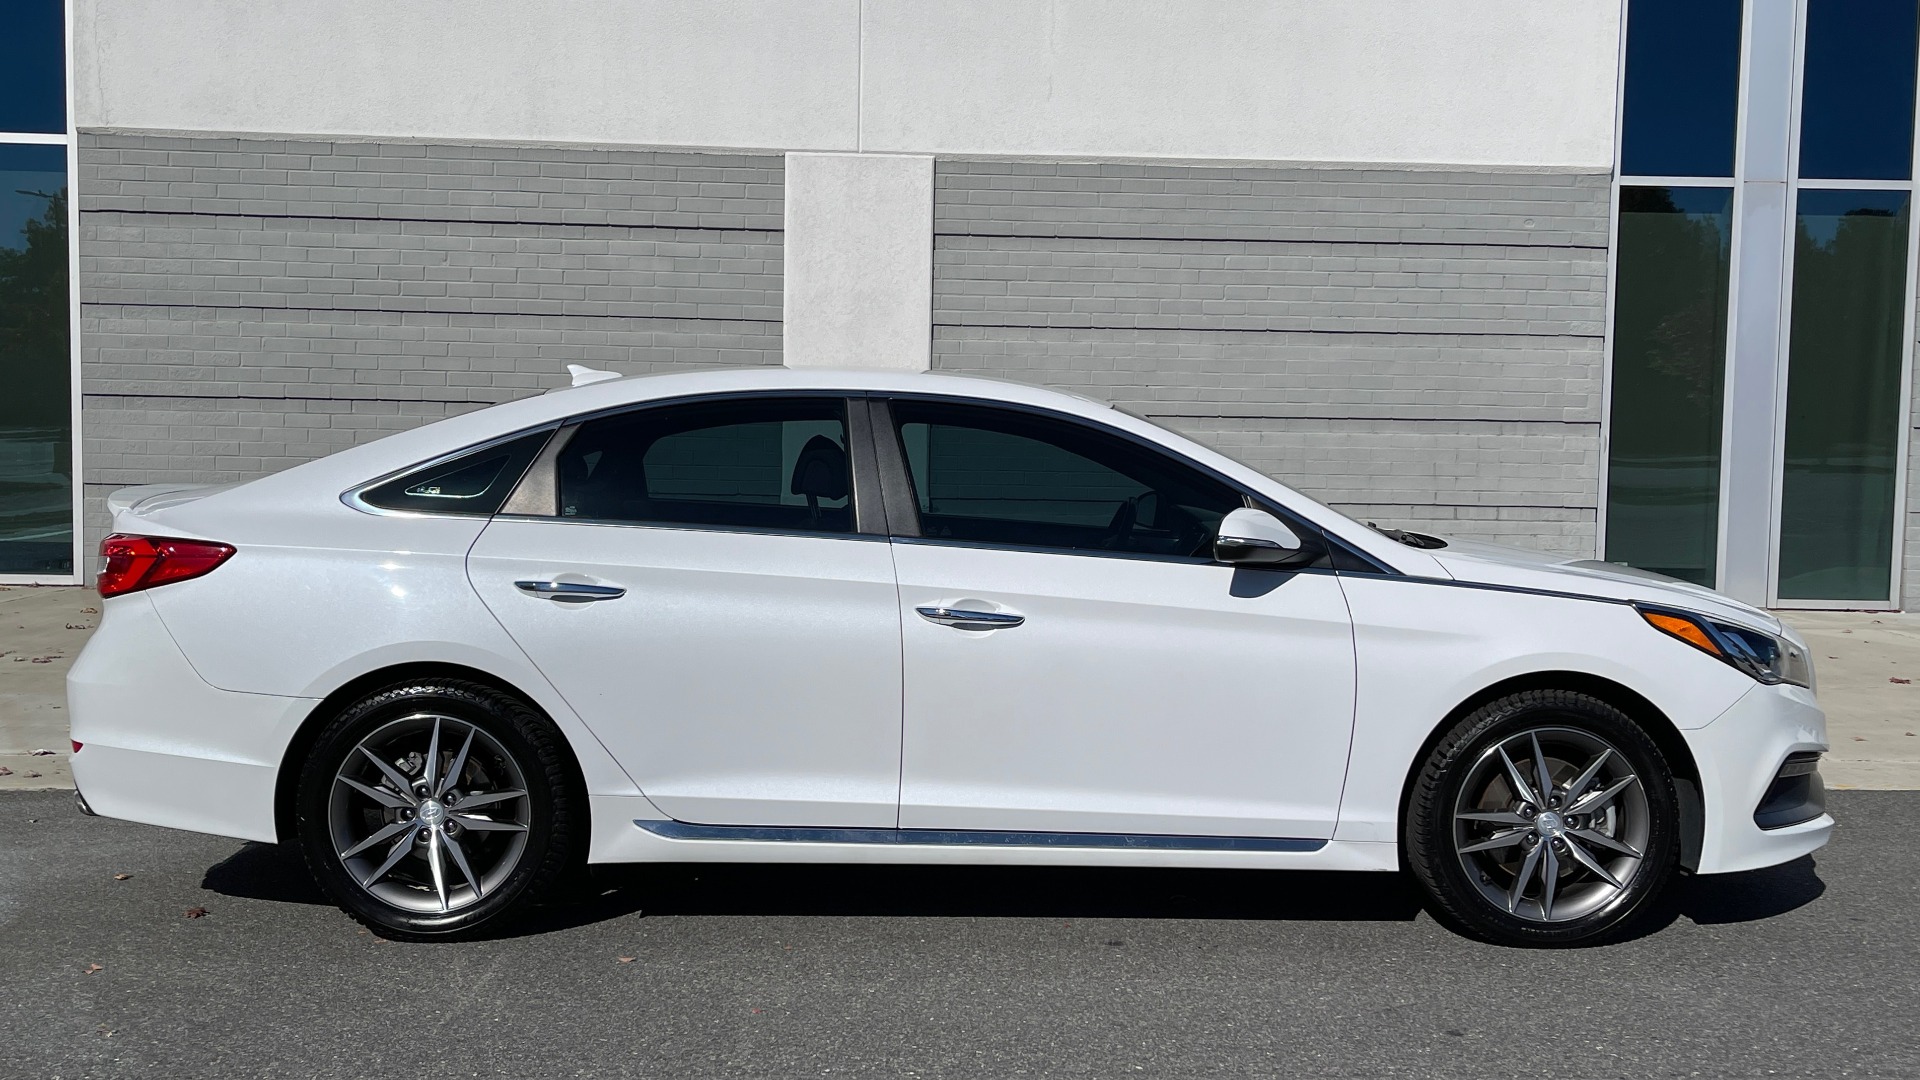 Used 2015 Hyundai SONATA 2.0T SPORT SEDAN / 6-SPD AUTO / BLIND SPOT / REARVIEW for sale Sold at Formula Imports in Charlotte NC 28227 5